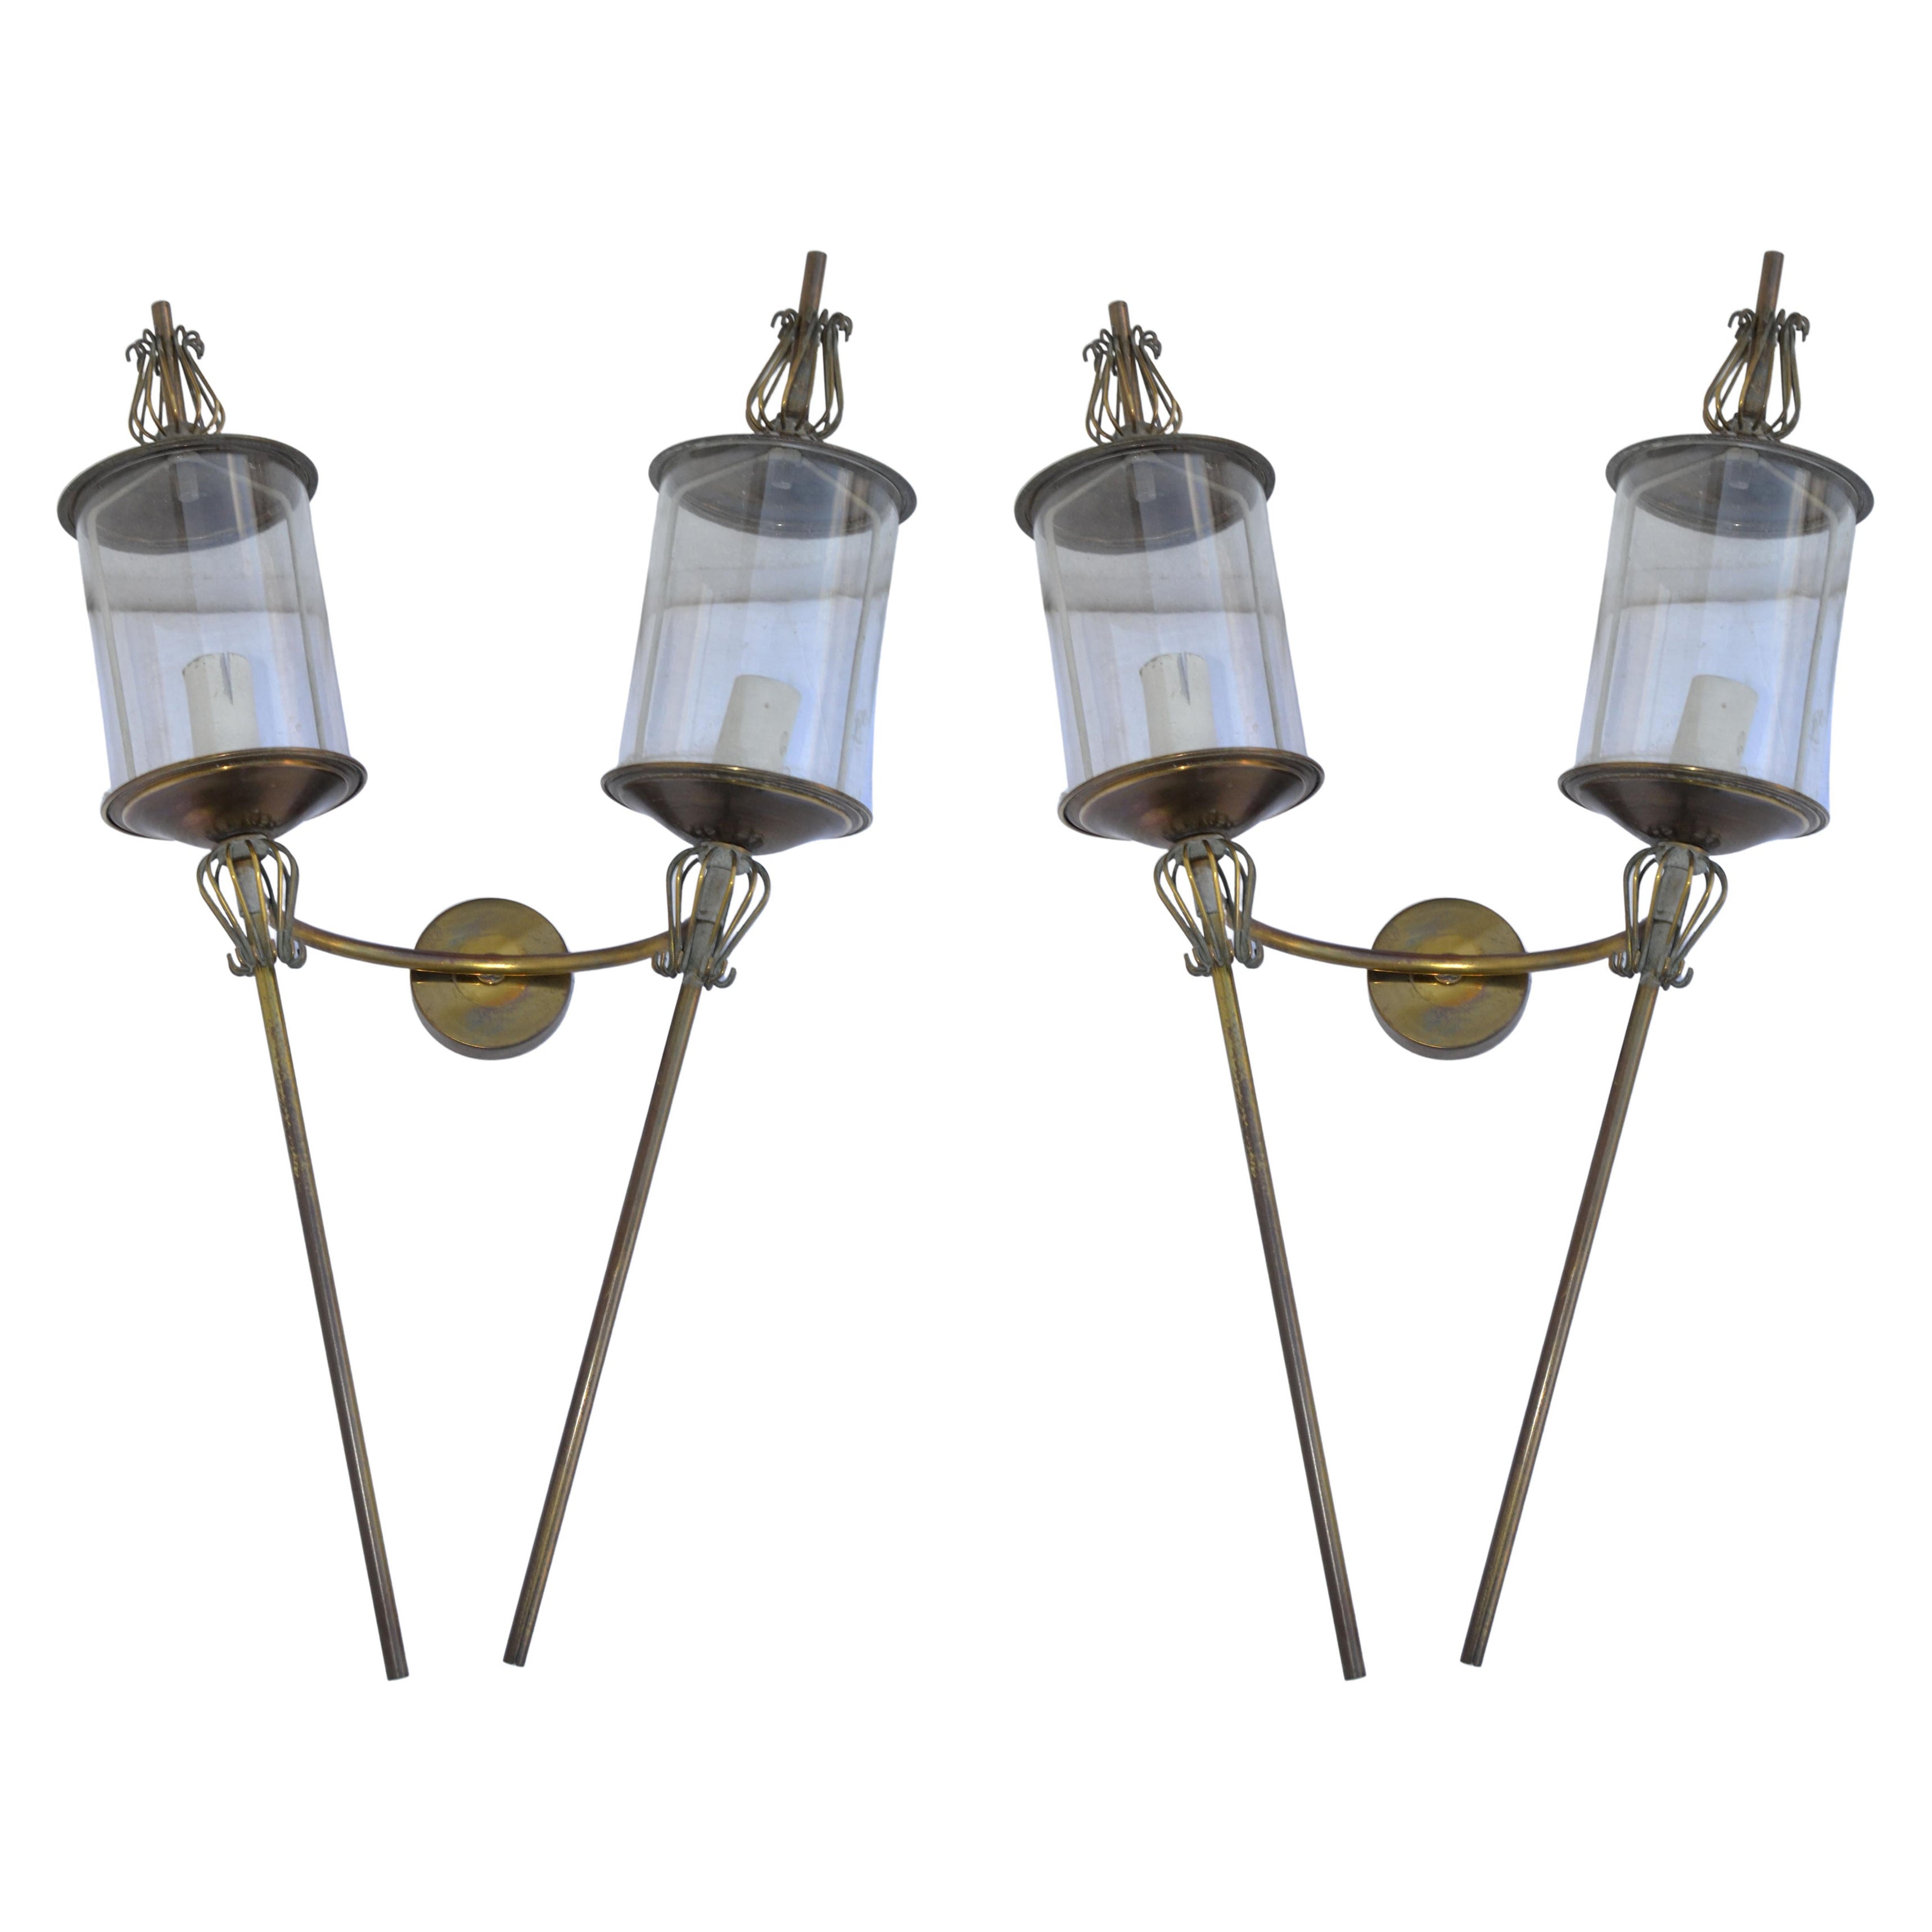 Pair of Maison Lunel Brass & Glass Sconces, Wall Lamp, French Mid-Century